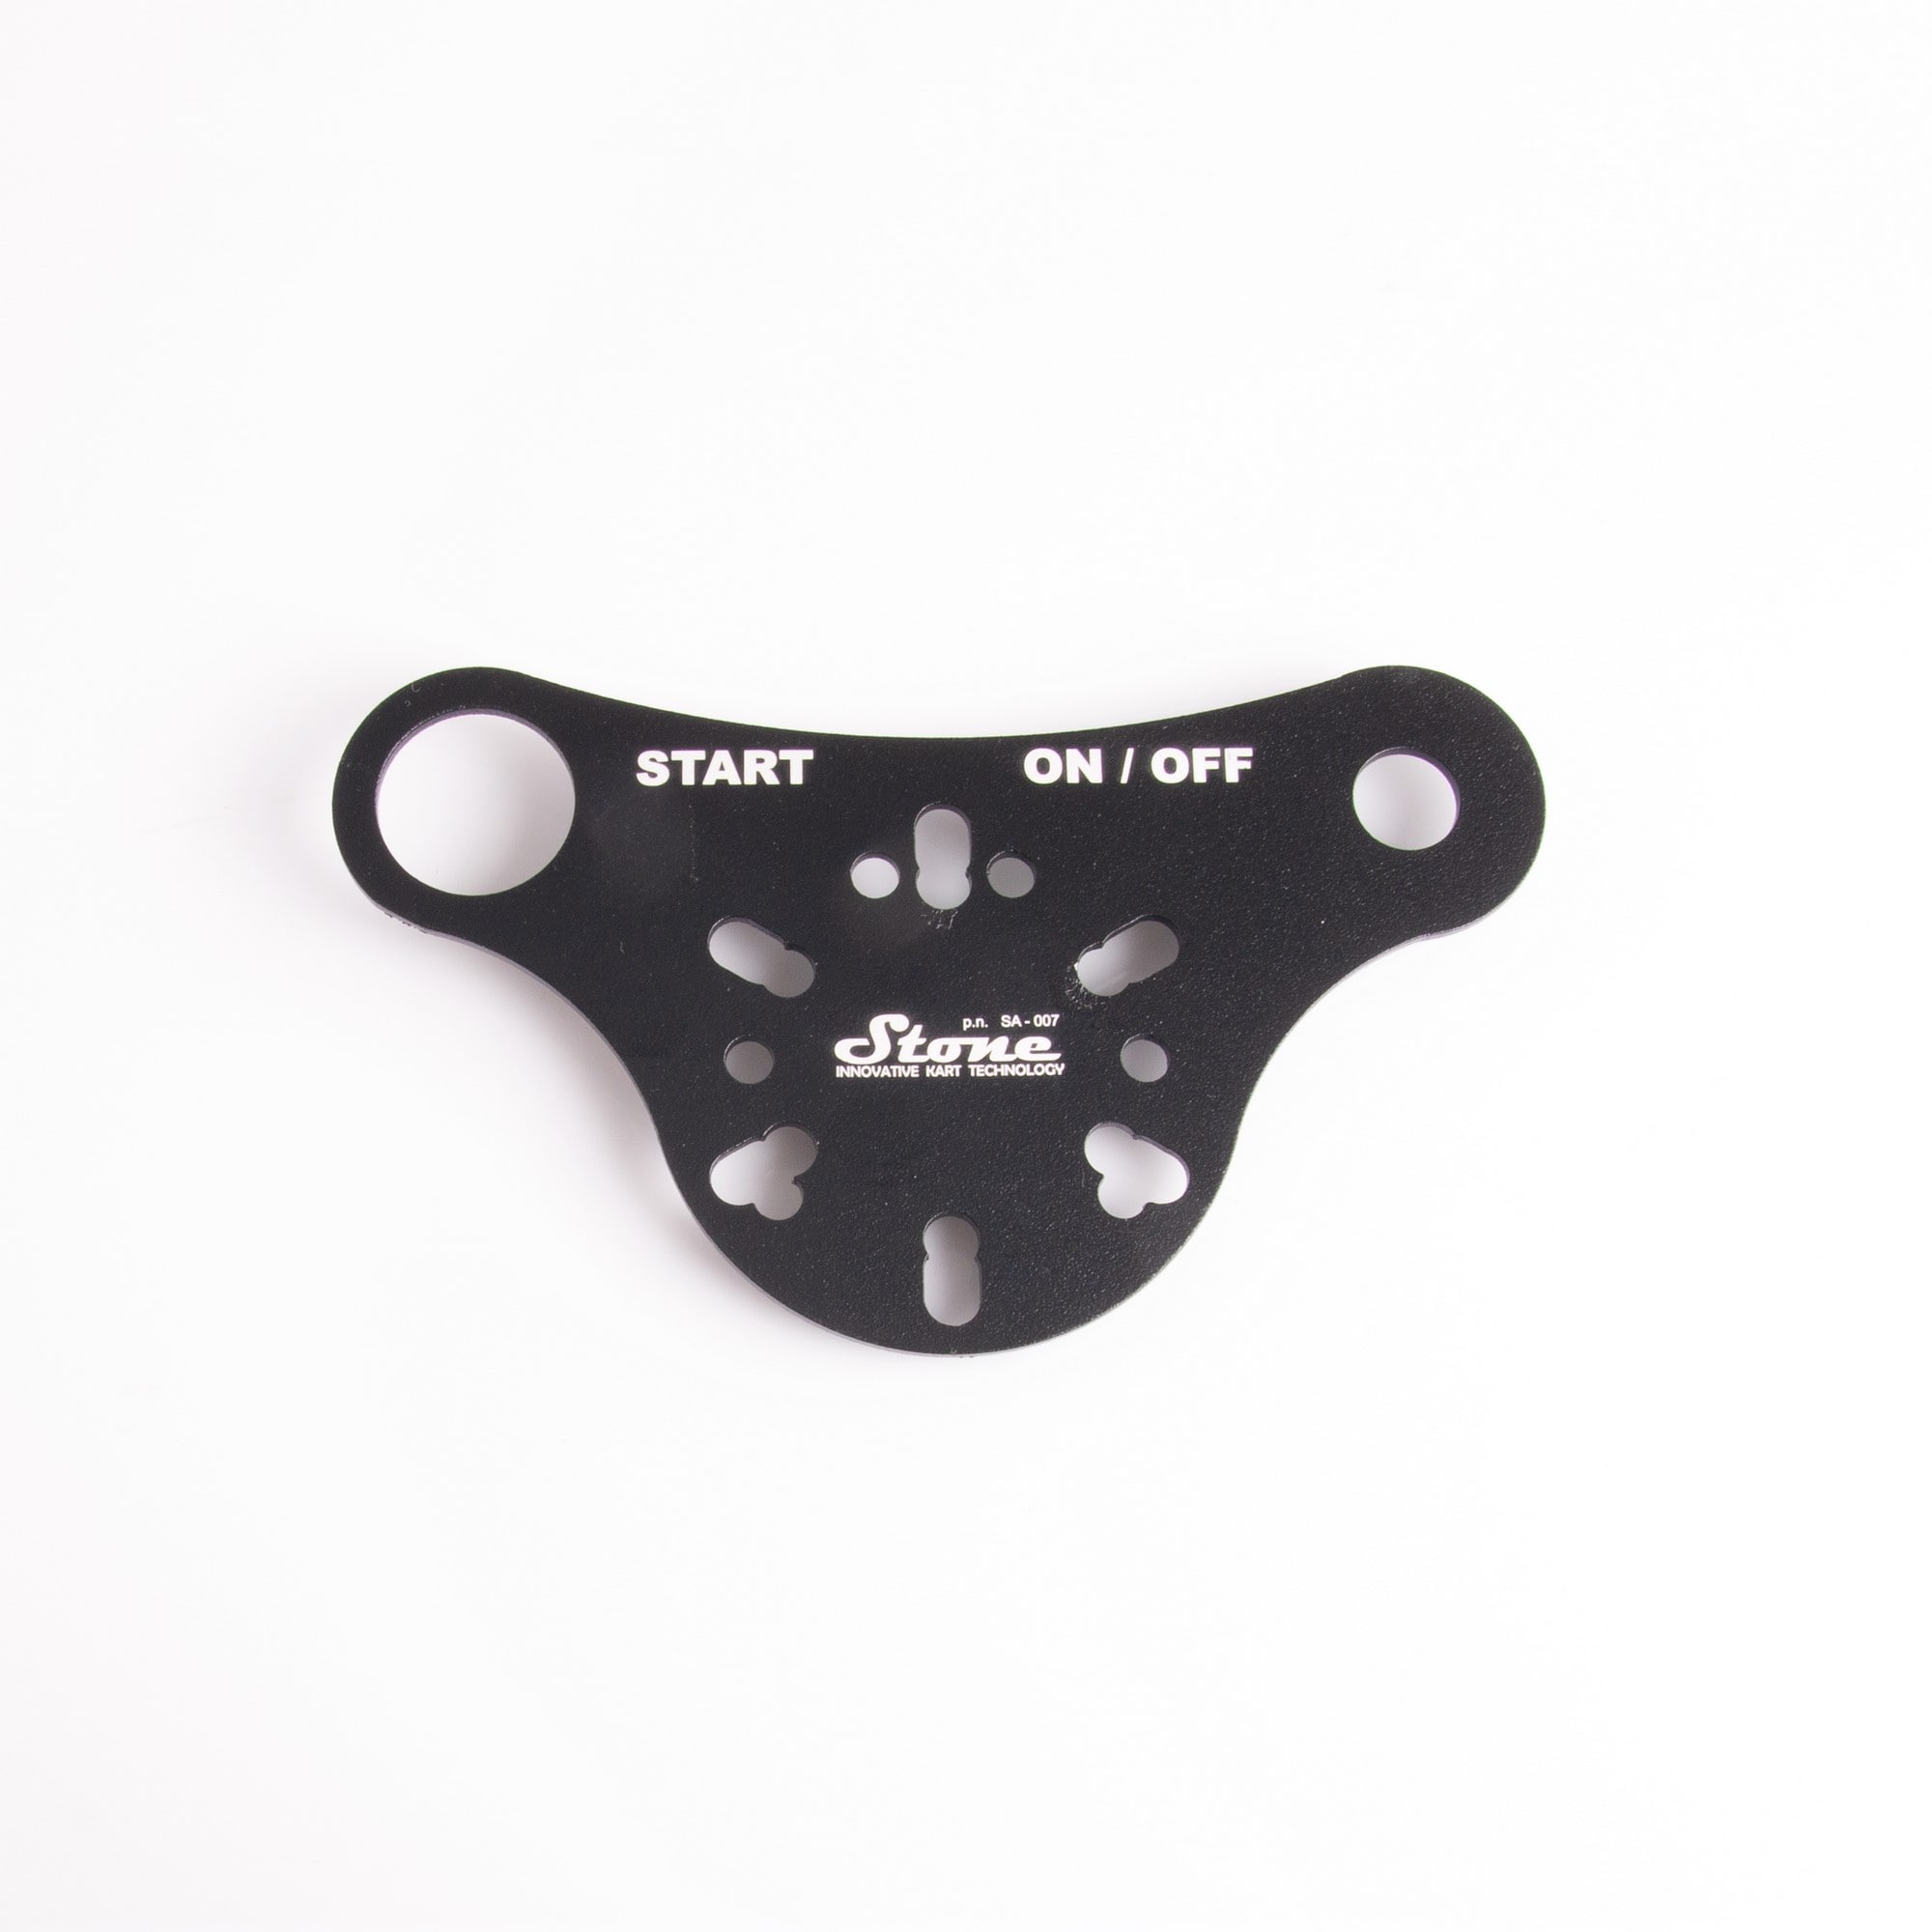 Universal mount for steering wheel buttons (above)